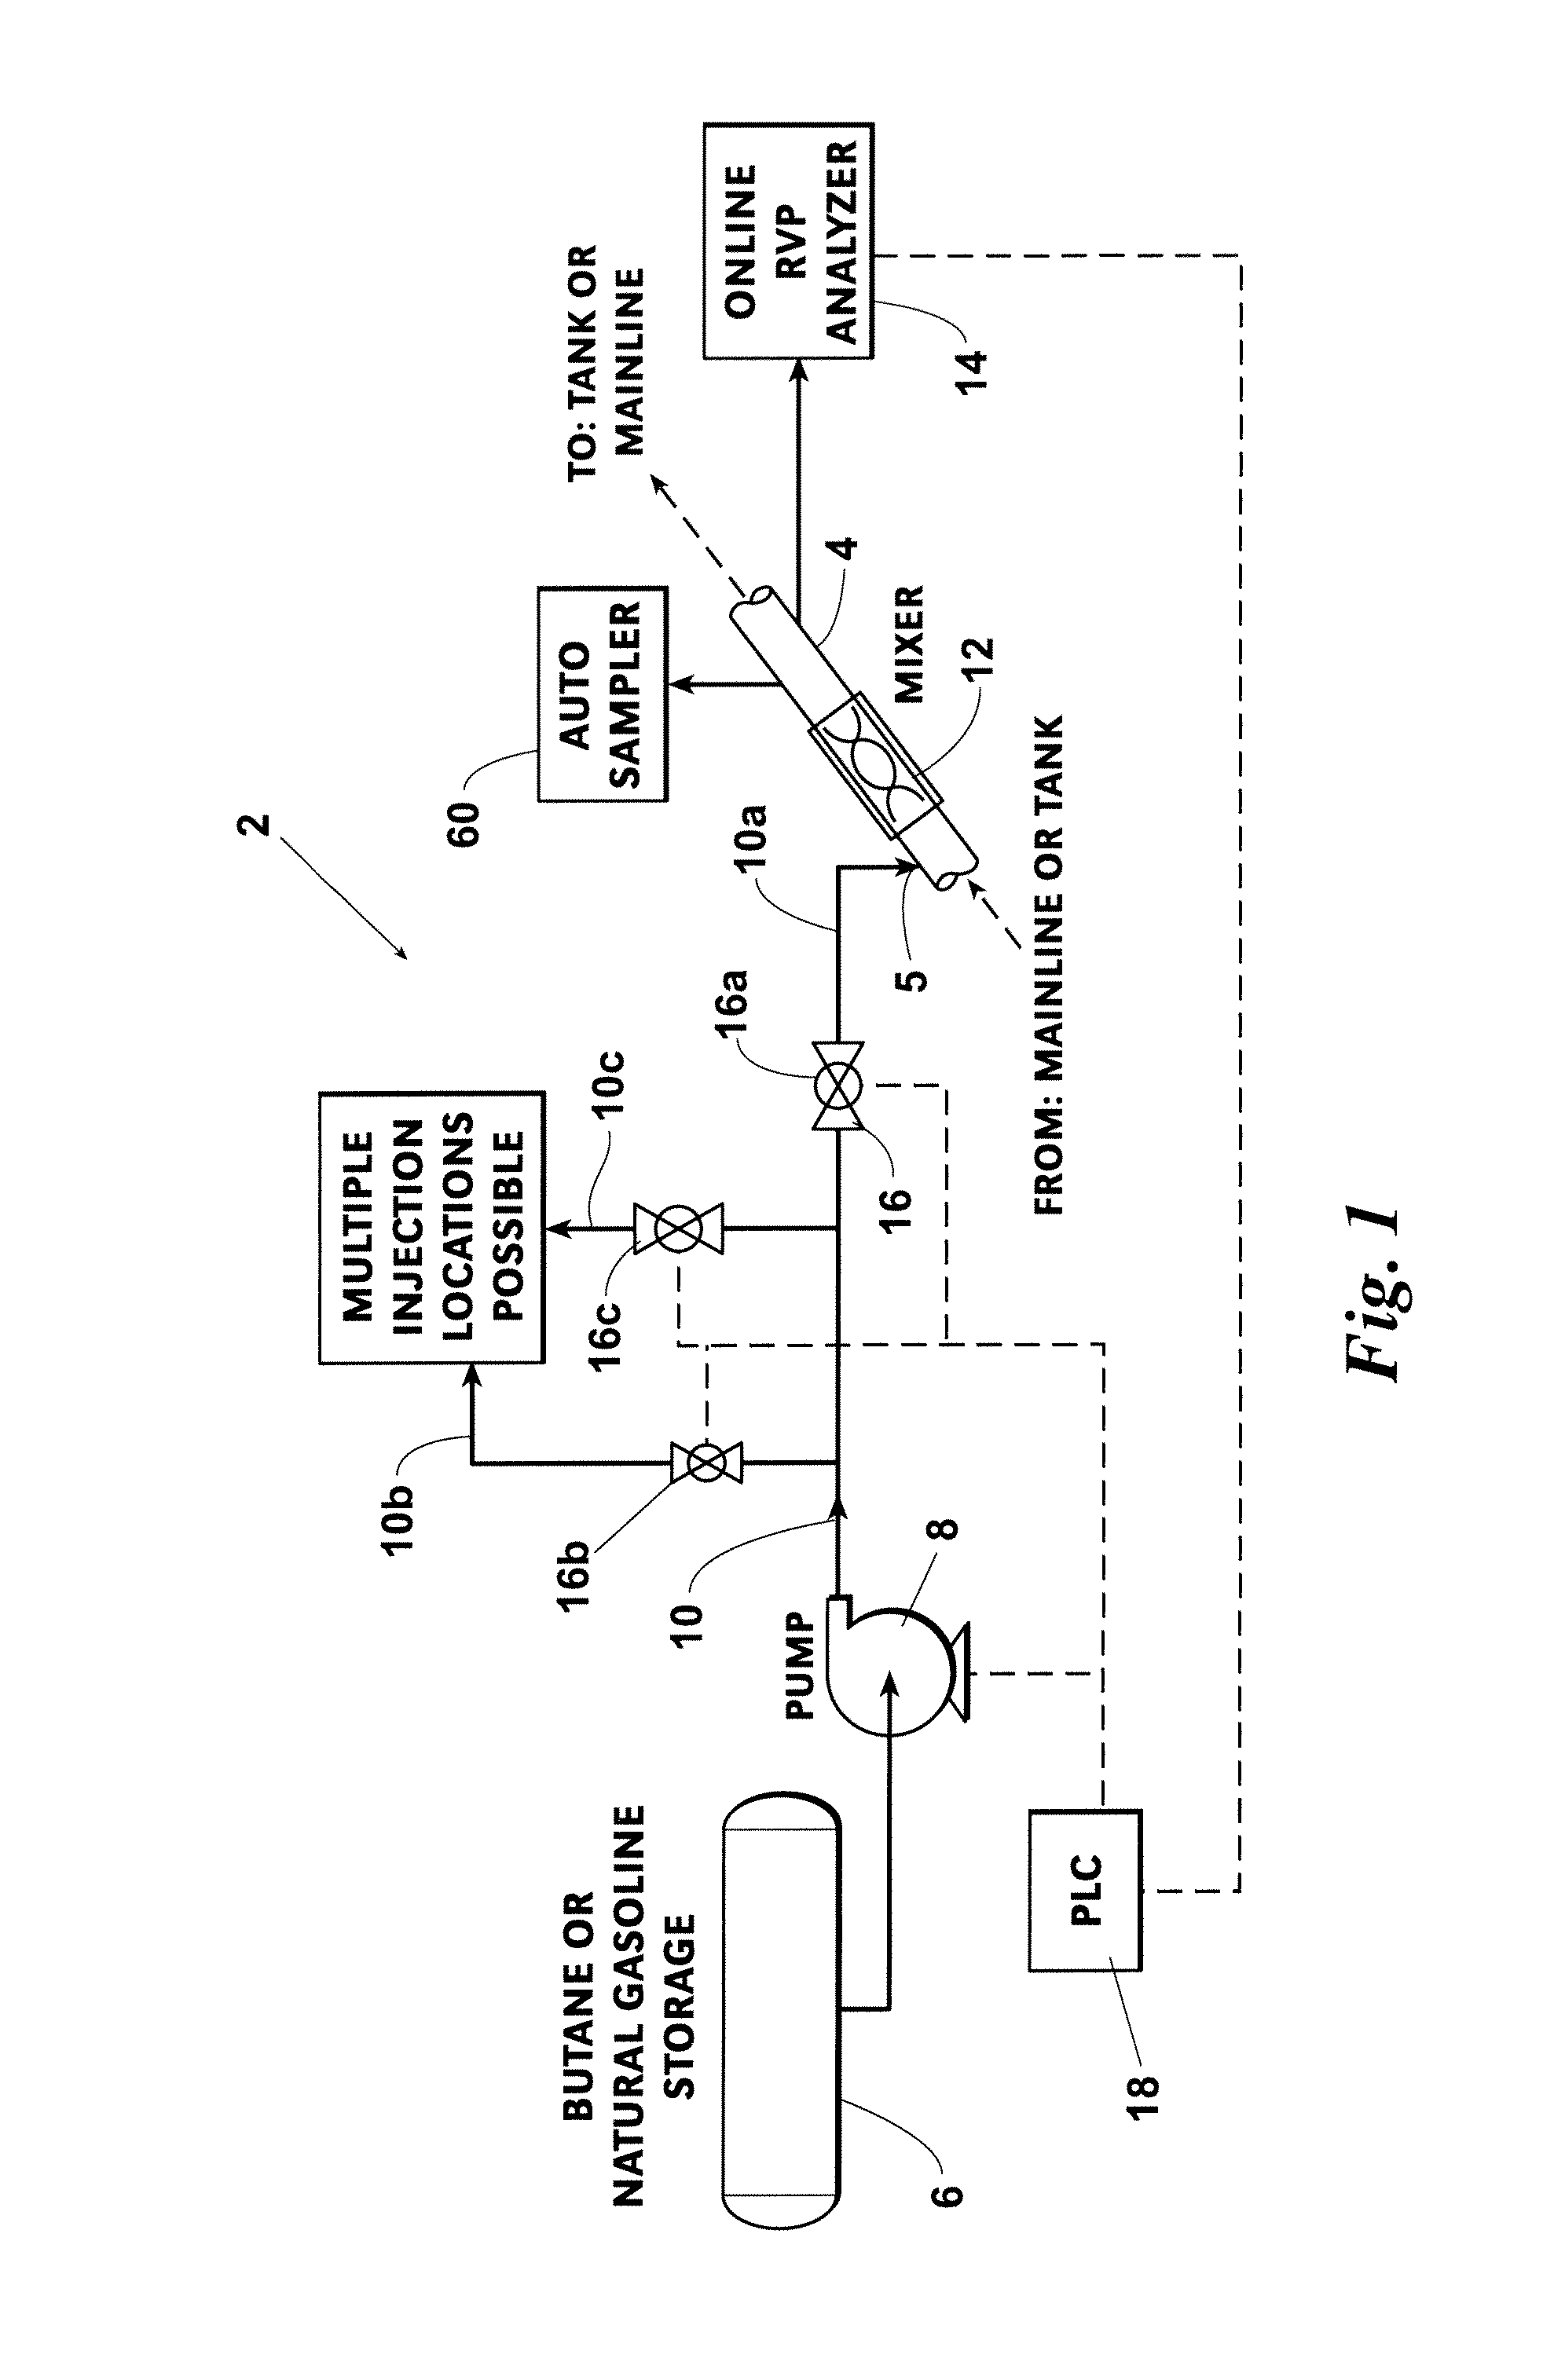 System and method for adding blend stocks to gasoline or other fuel stocks